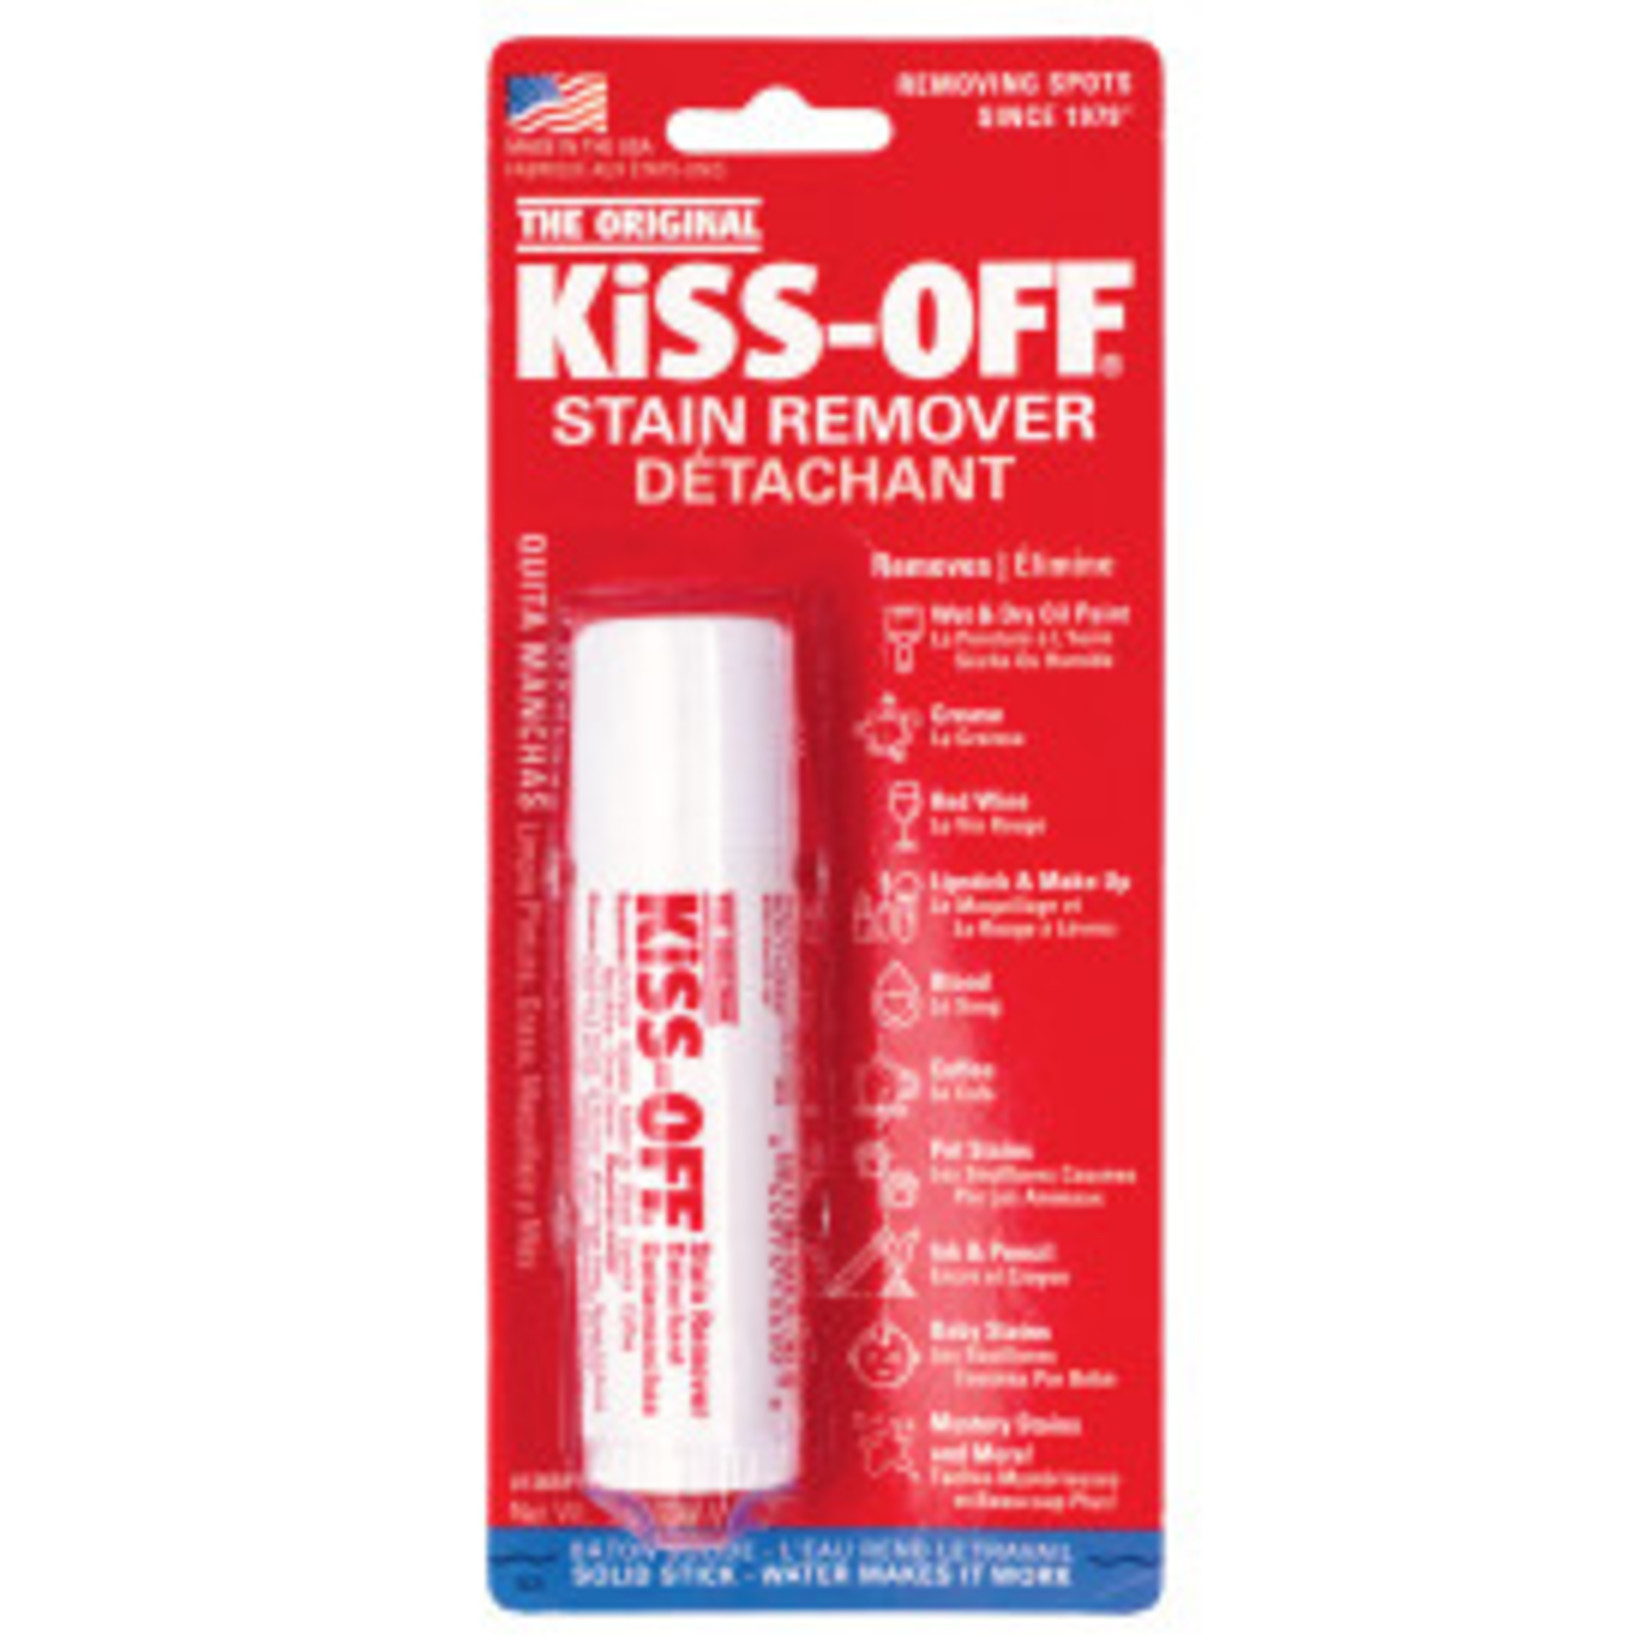 GENERAL PENCIL GENERAL'S KISS OFF STAIN REMOVER